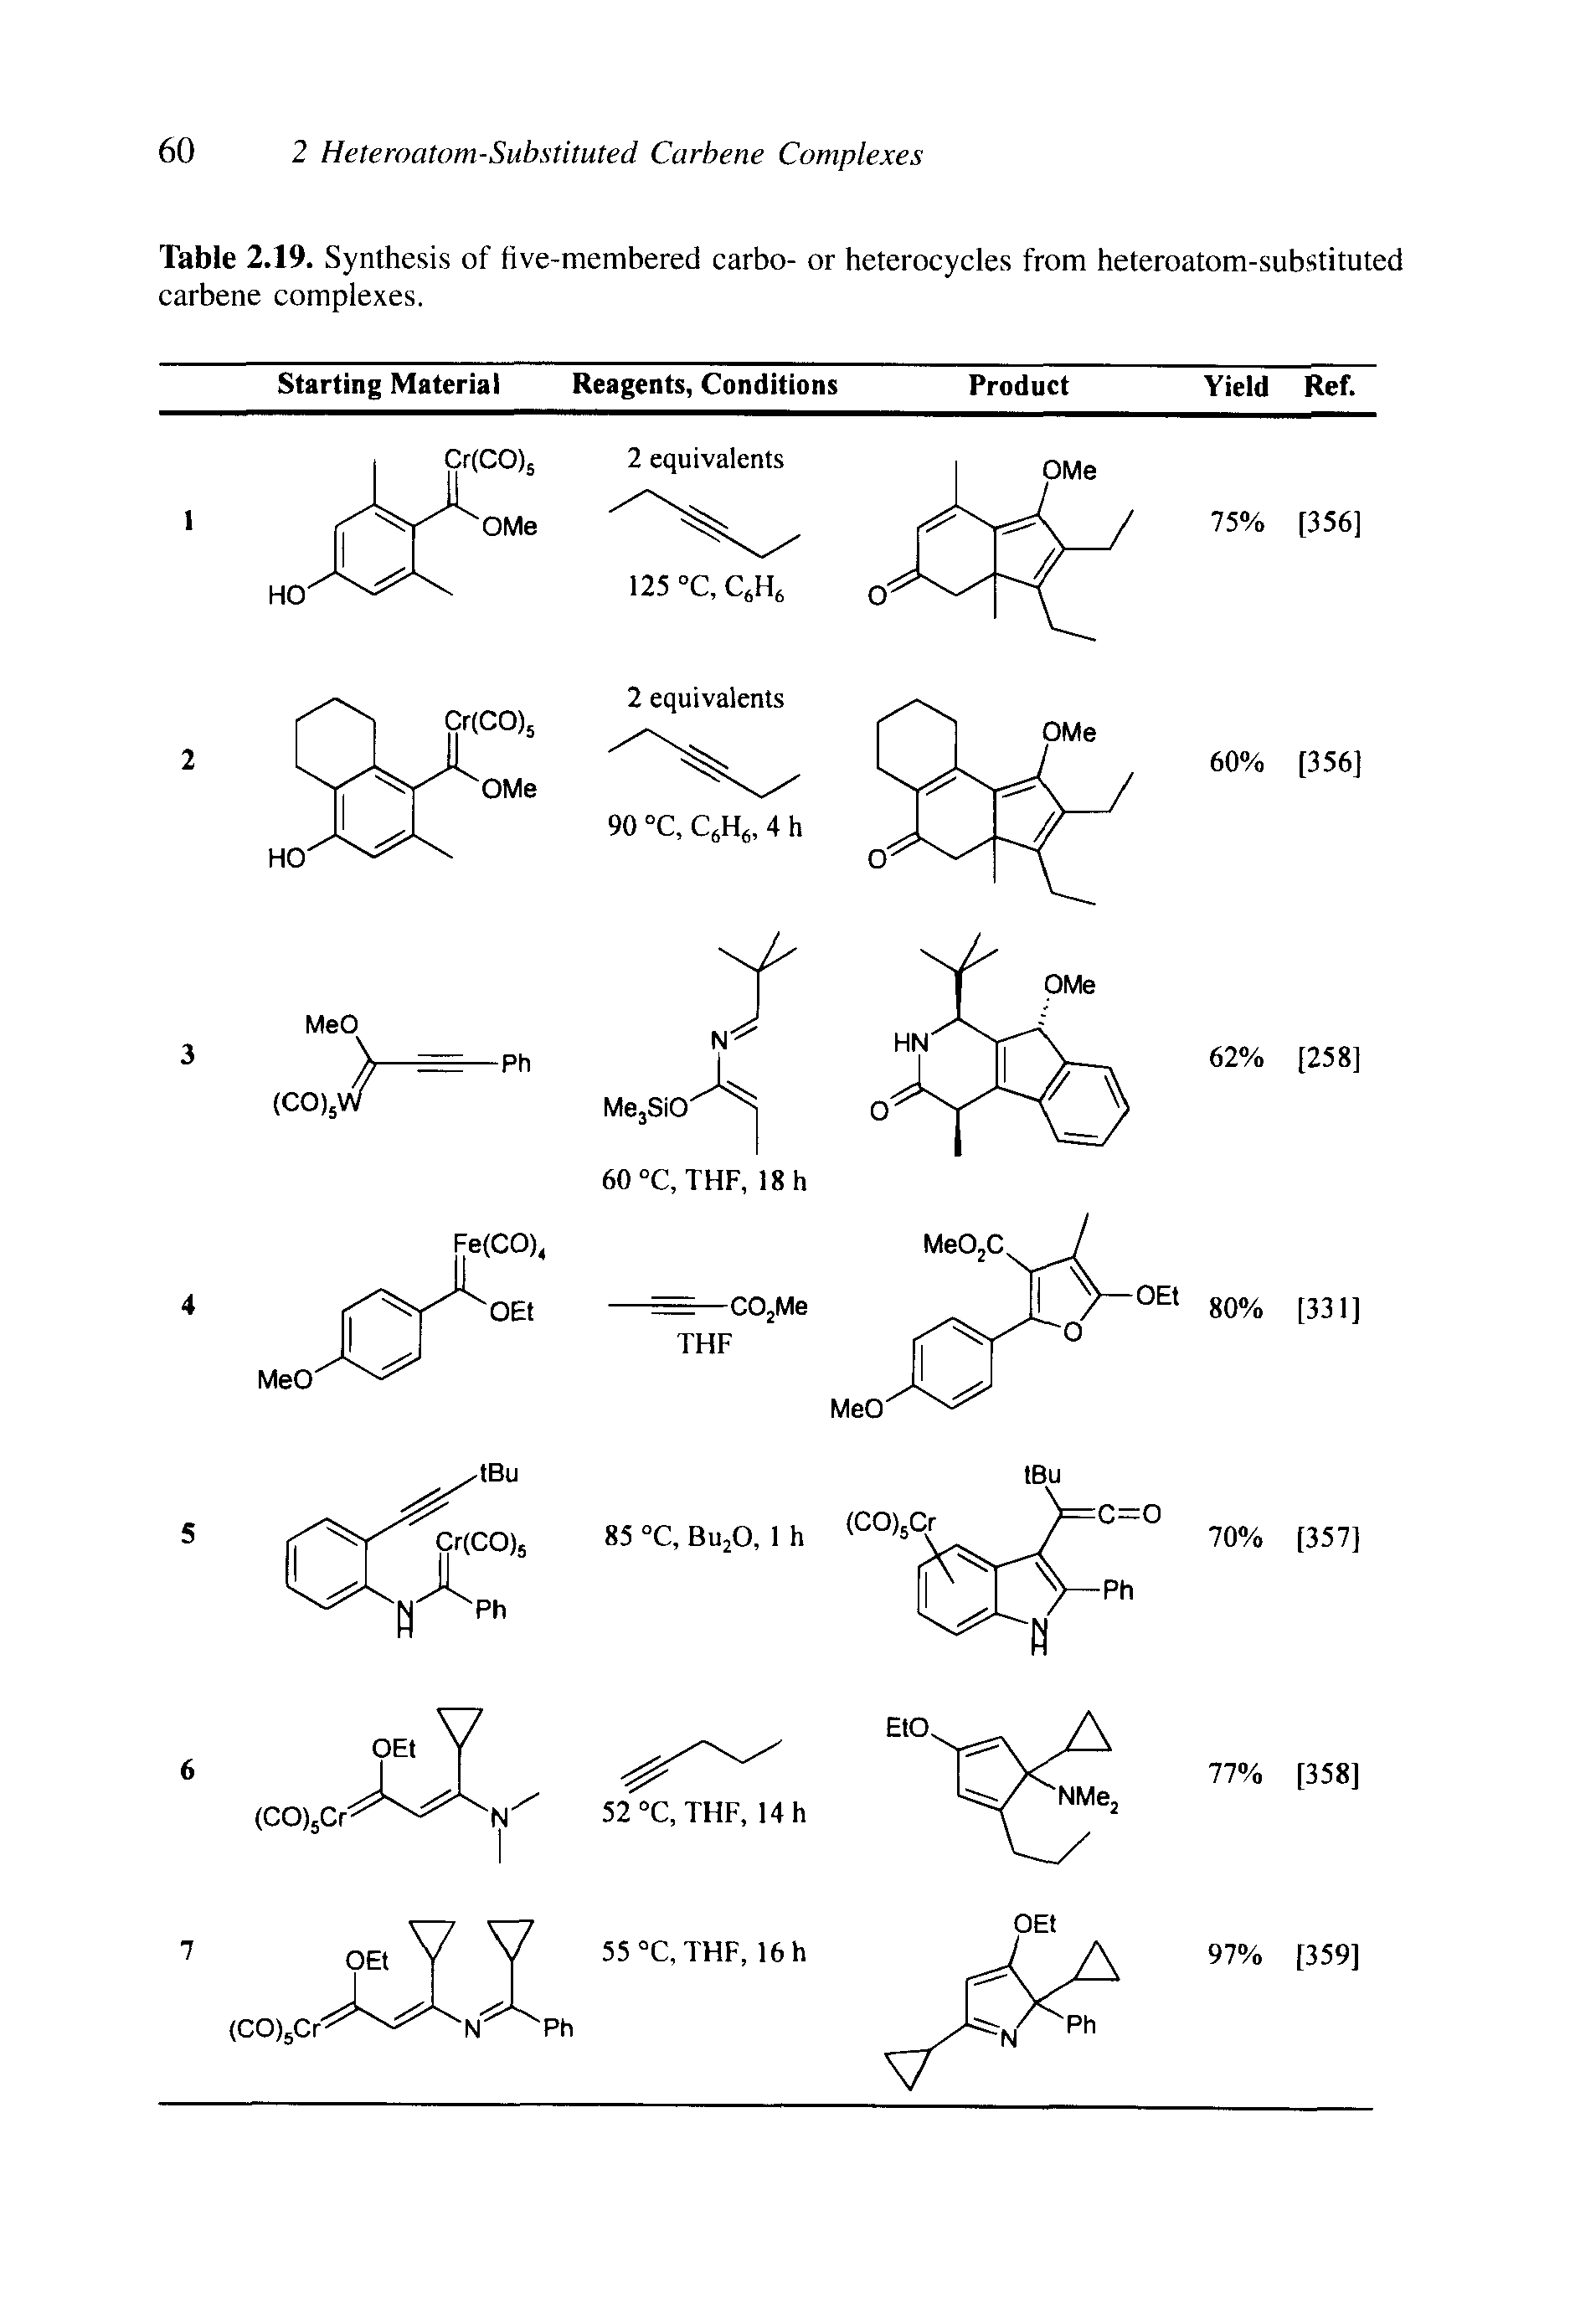 Table 2.19. Synthesis of five-membered carbo- or heterocycles from heteroatom-substituted earbene complexes.